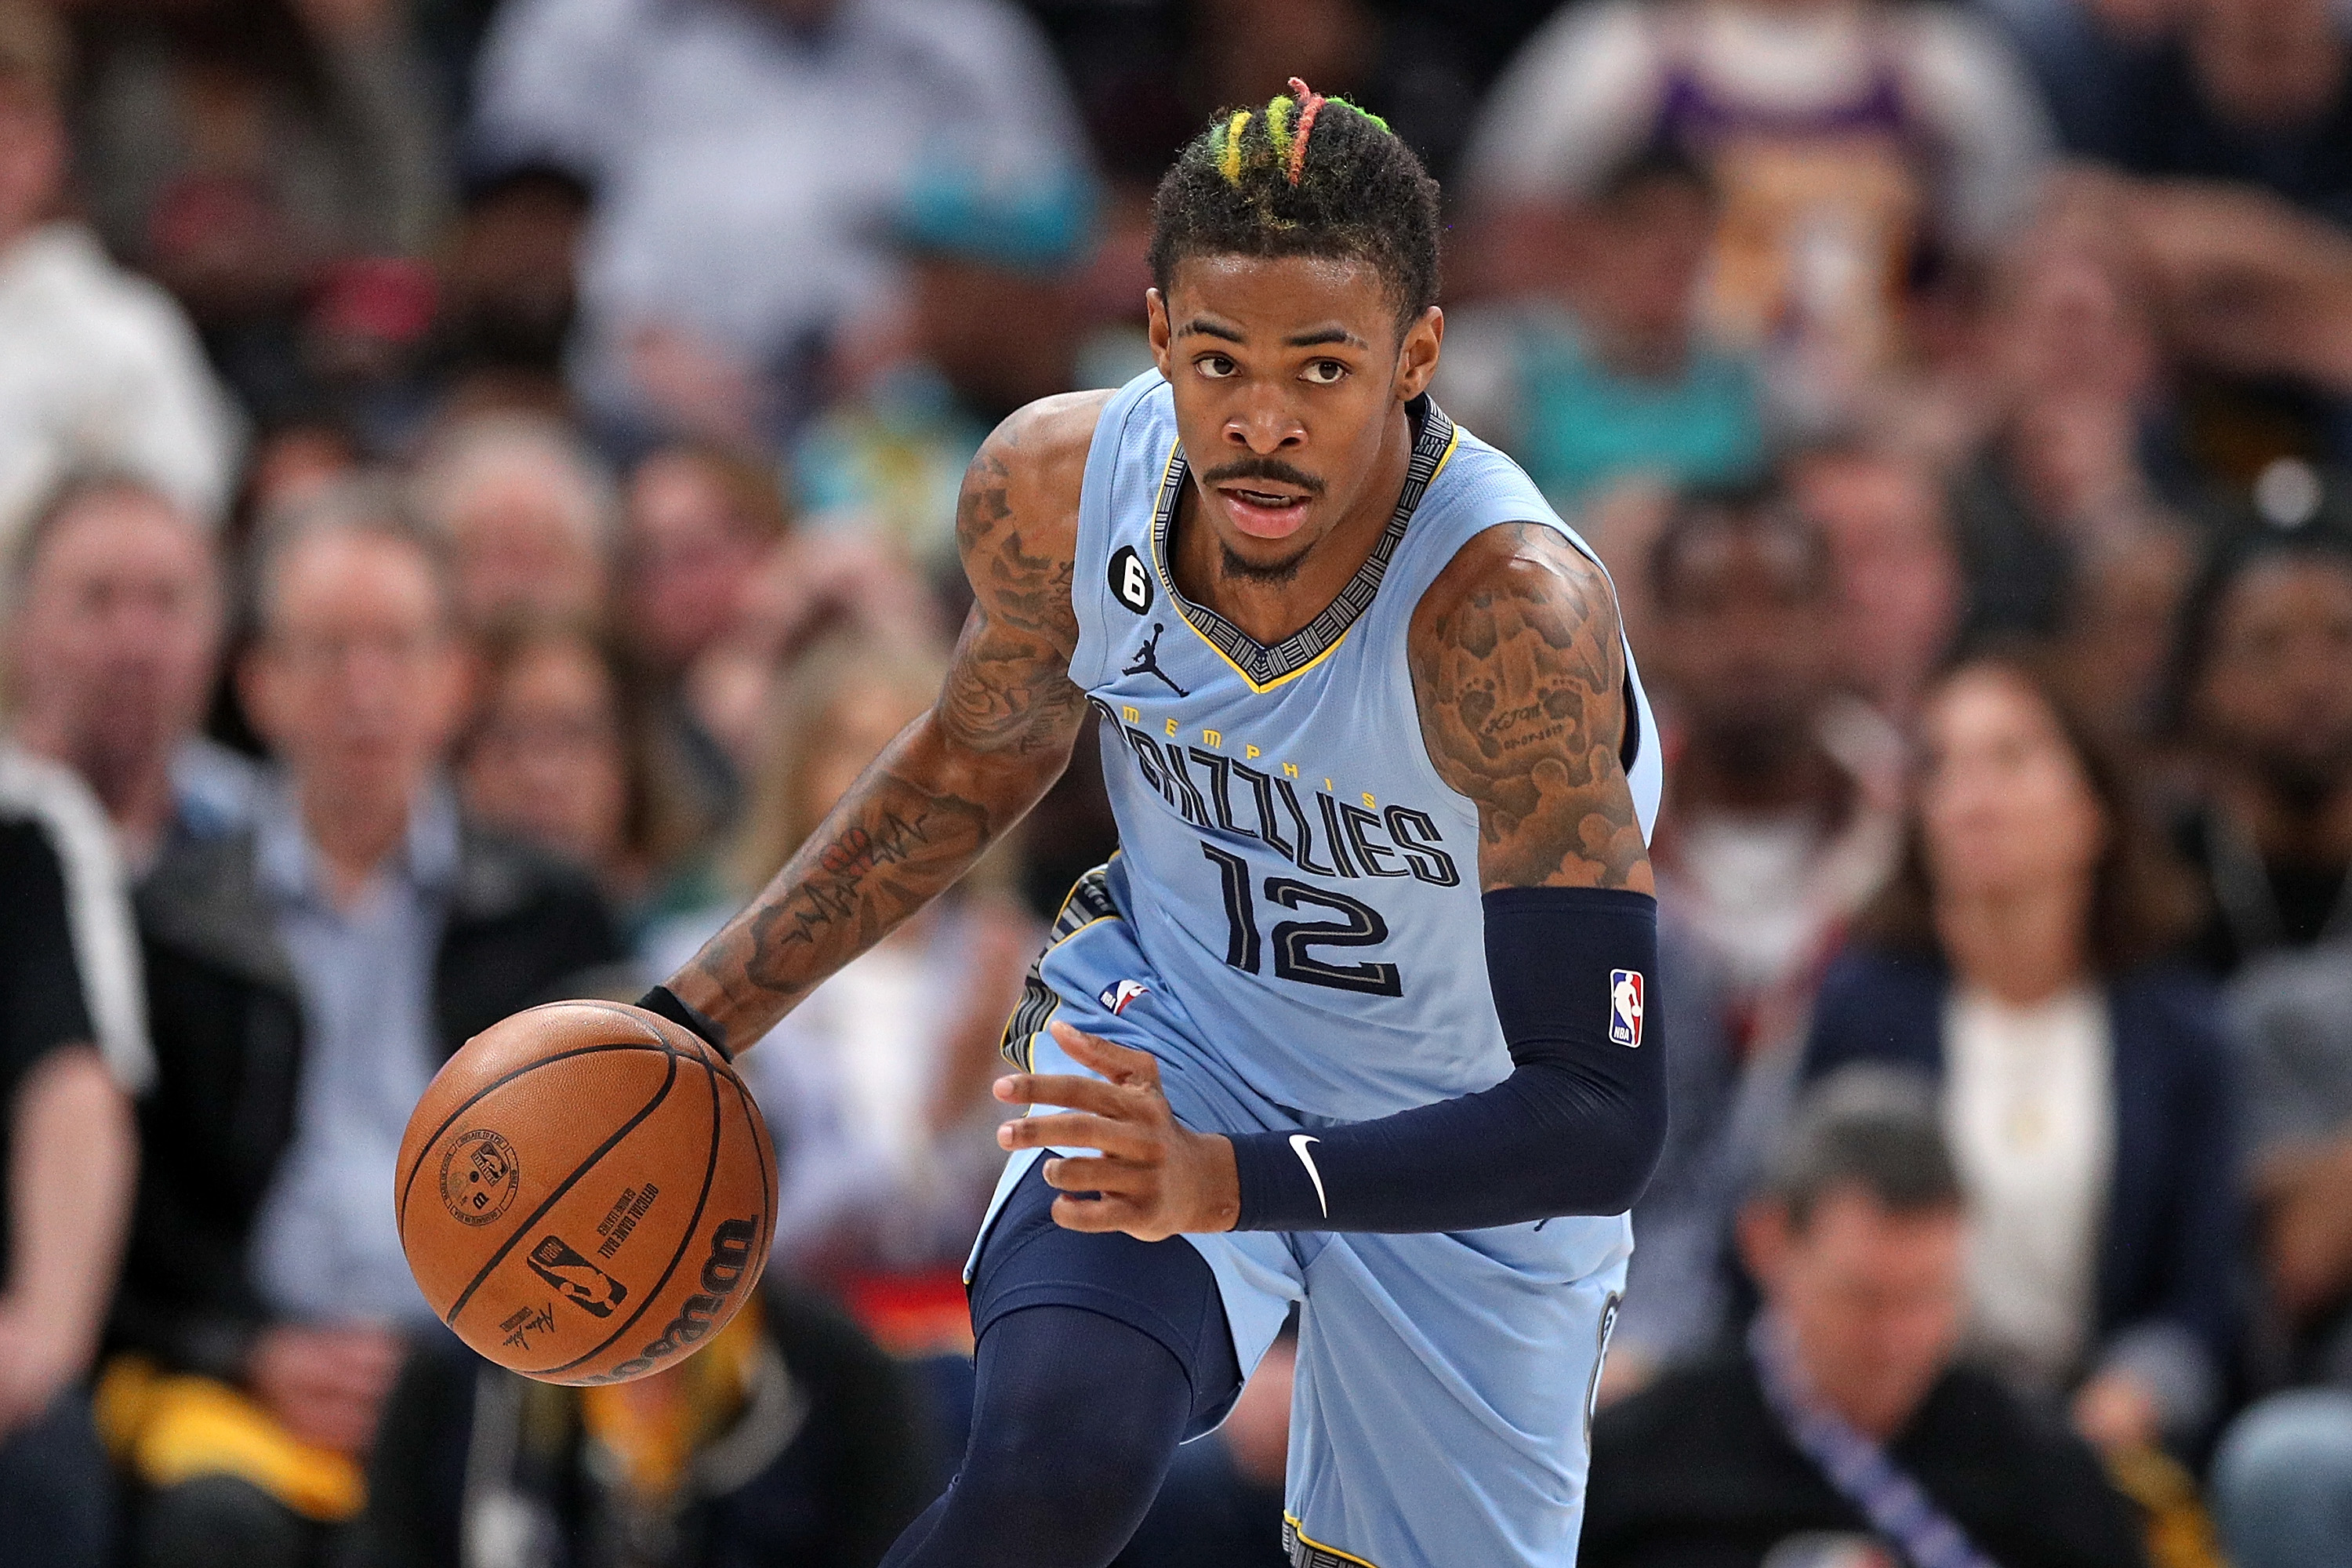 Nike sides with Ja Morant after NBA suspends Grizzlies star for 25 games